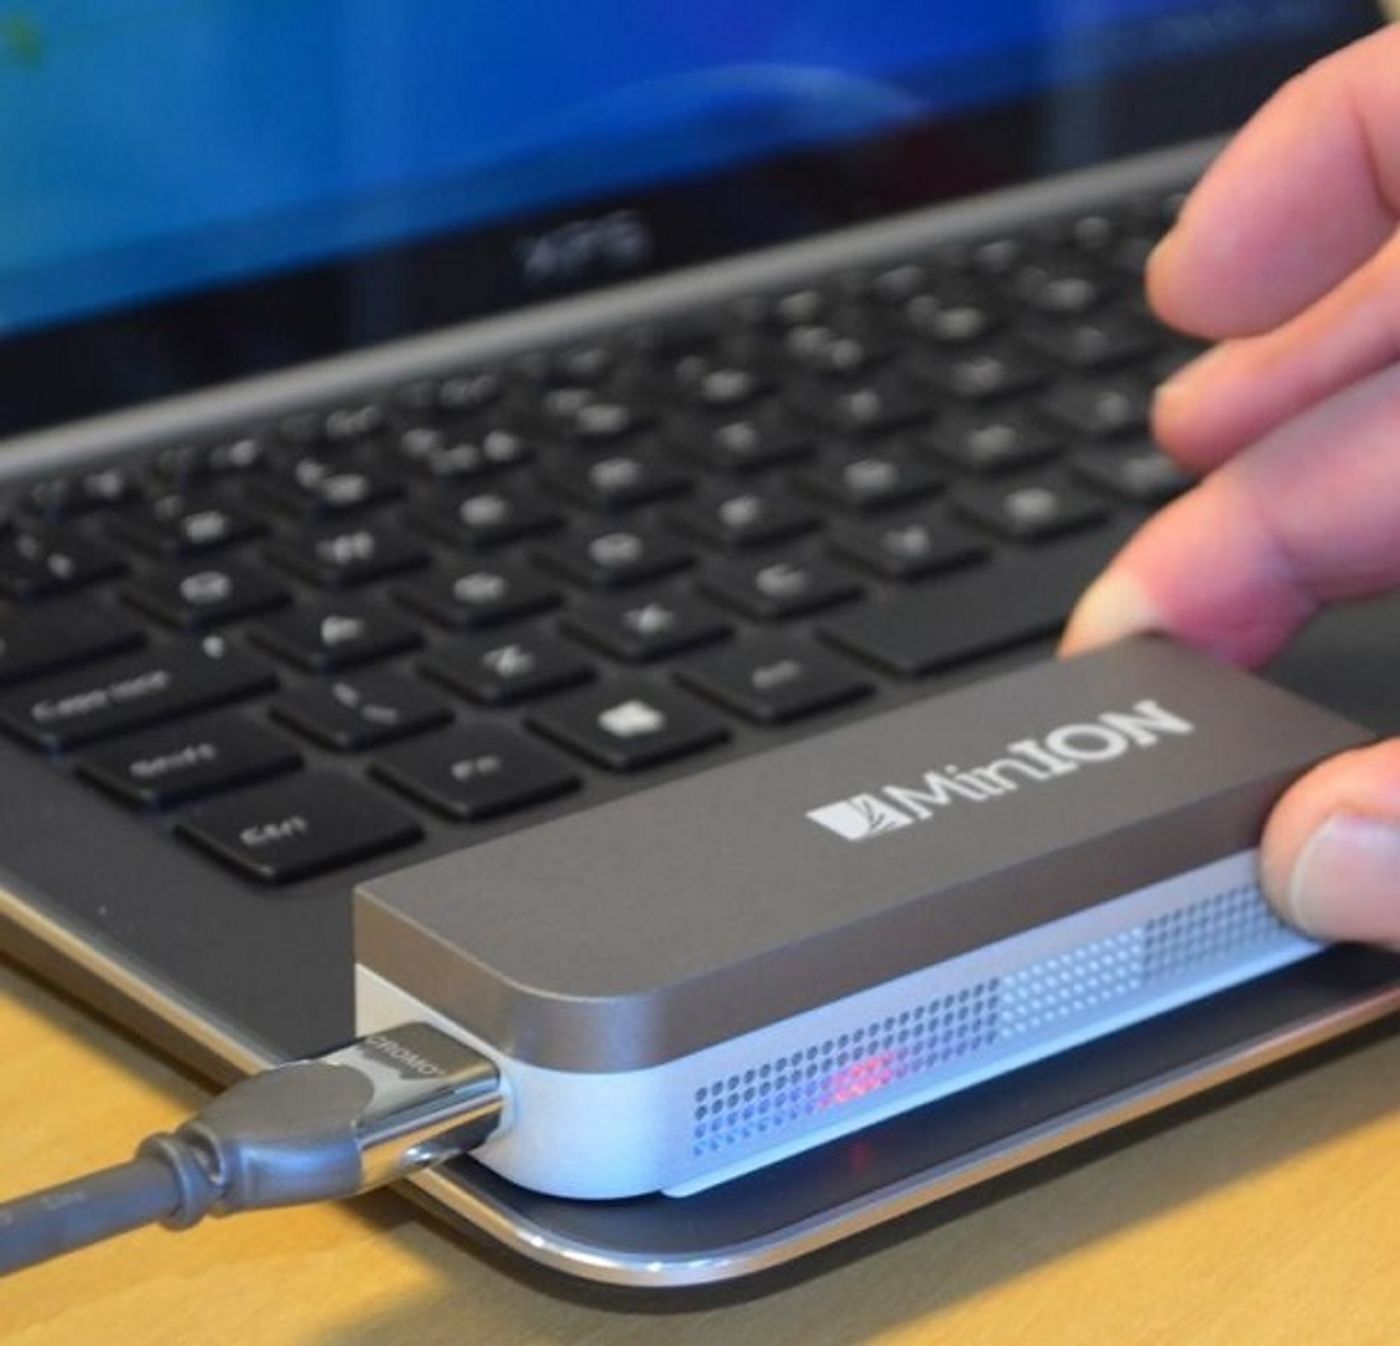 MinION is a portable sequencing DNA device.